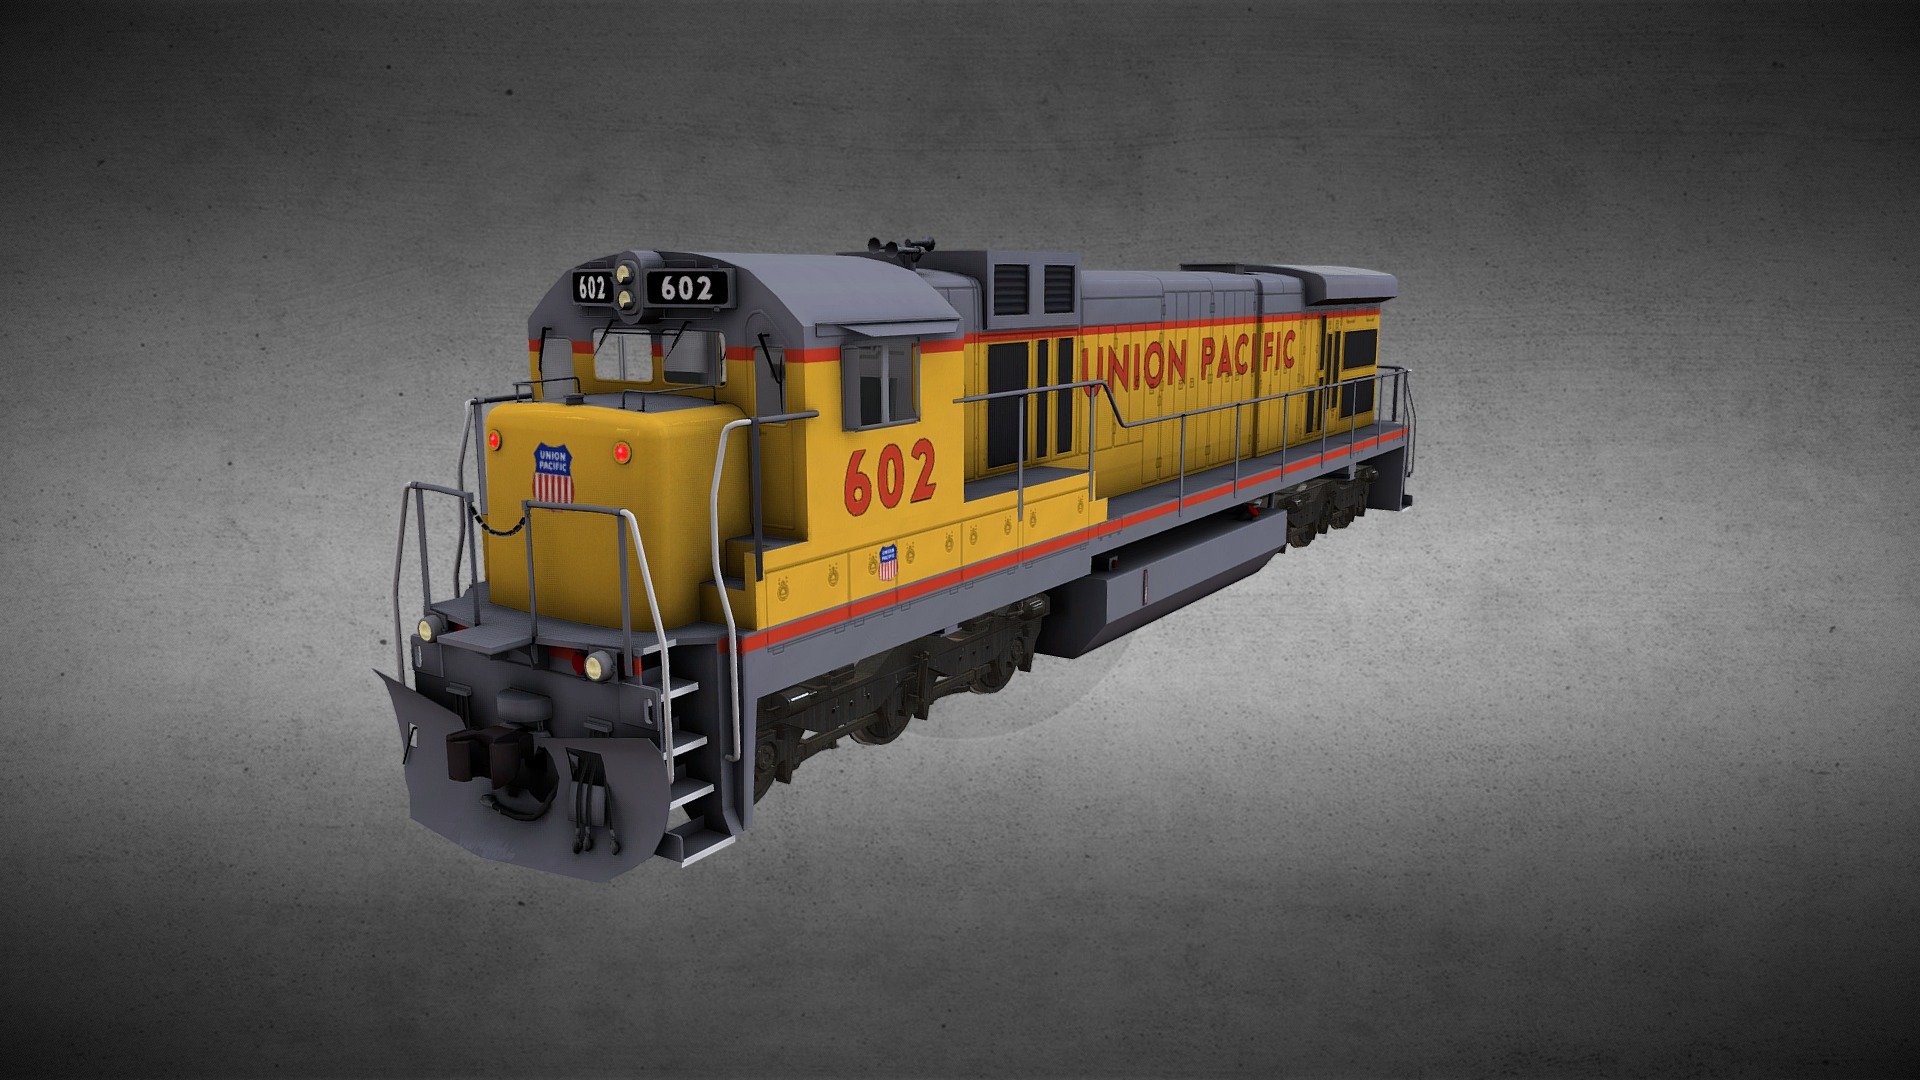 DE: Die GE C36-7 ist eine 6-achsige dieselelektrische Lokomotive gebaut von GE Transportation Systems, GE do Brazil und A Goninan &amp; Co zwischen 1978 und 1989. 599 Exemplare dieser Lokomotive wurden gebaut.

EN: The GE C36-7 is a 6-axle diesel-electric locomotive built by GE Transportation Systems, GE do Brazil and A Goninan &amp; Co between 1978 and 1989. It is an updated GE U36C with a 16 cylinder FDL engine. It is externally very similar to the GE C30-7 but it has larger air intakes under the radiators. The dynamic brakes grids of the late units are located in a high box behind the cab. 599 examples of this locomotive were built 3d model